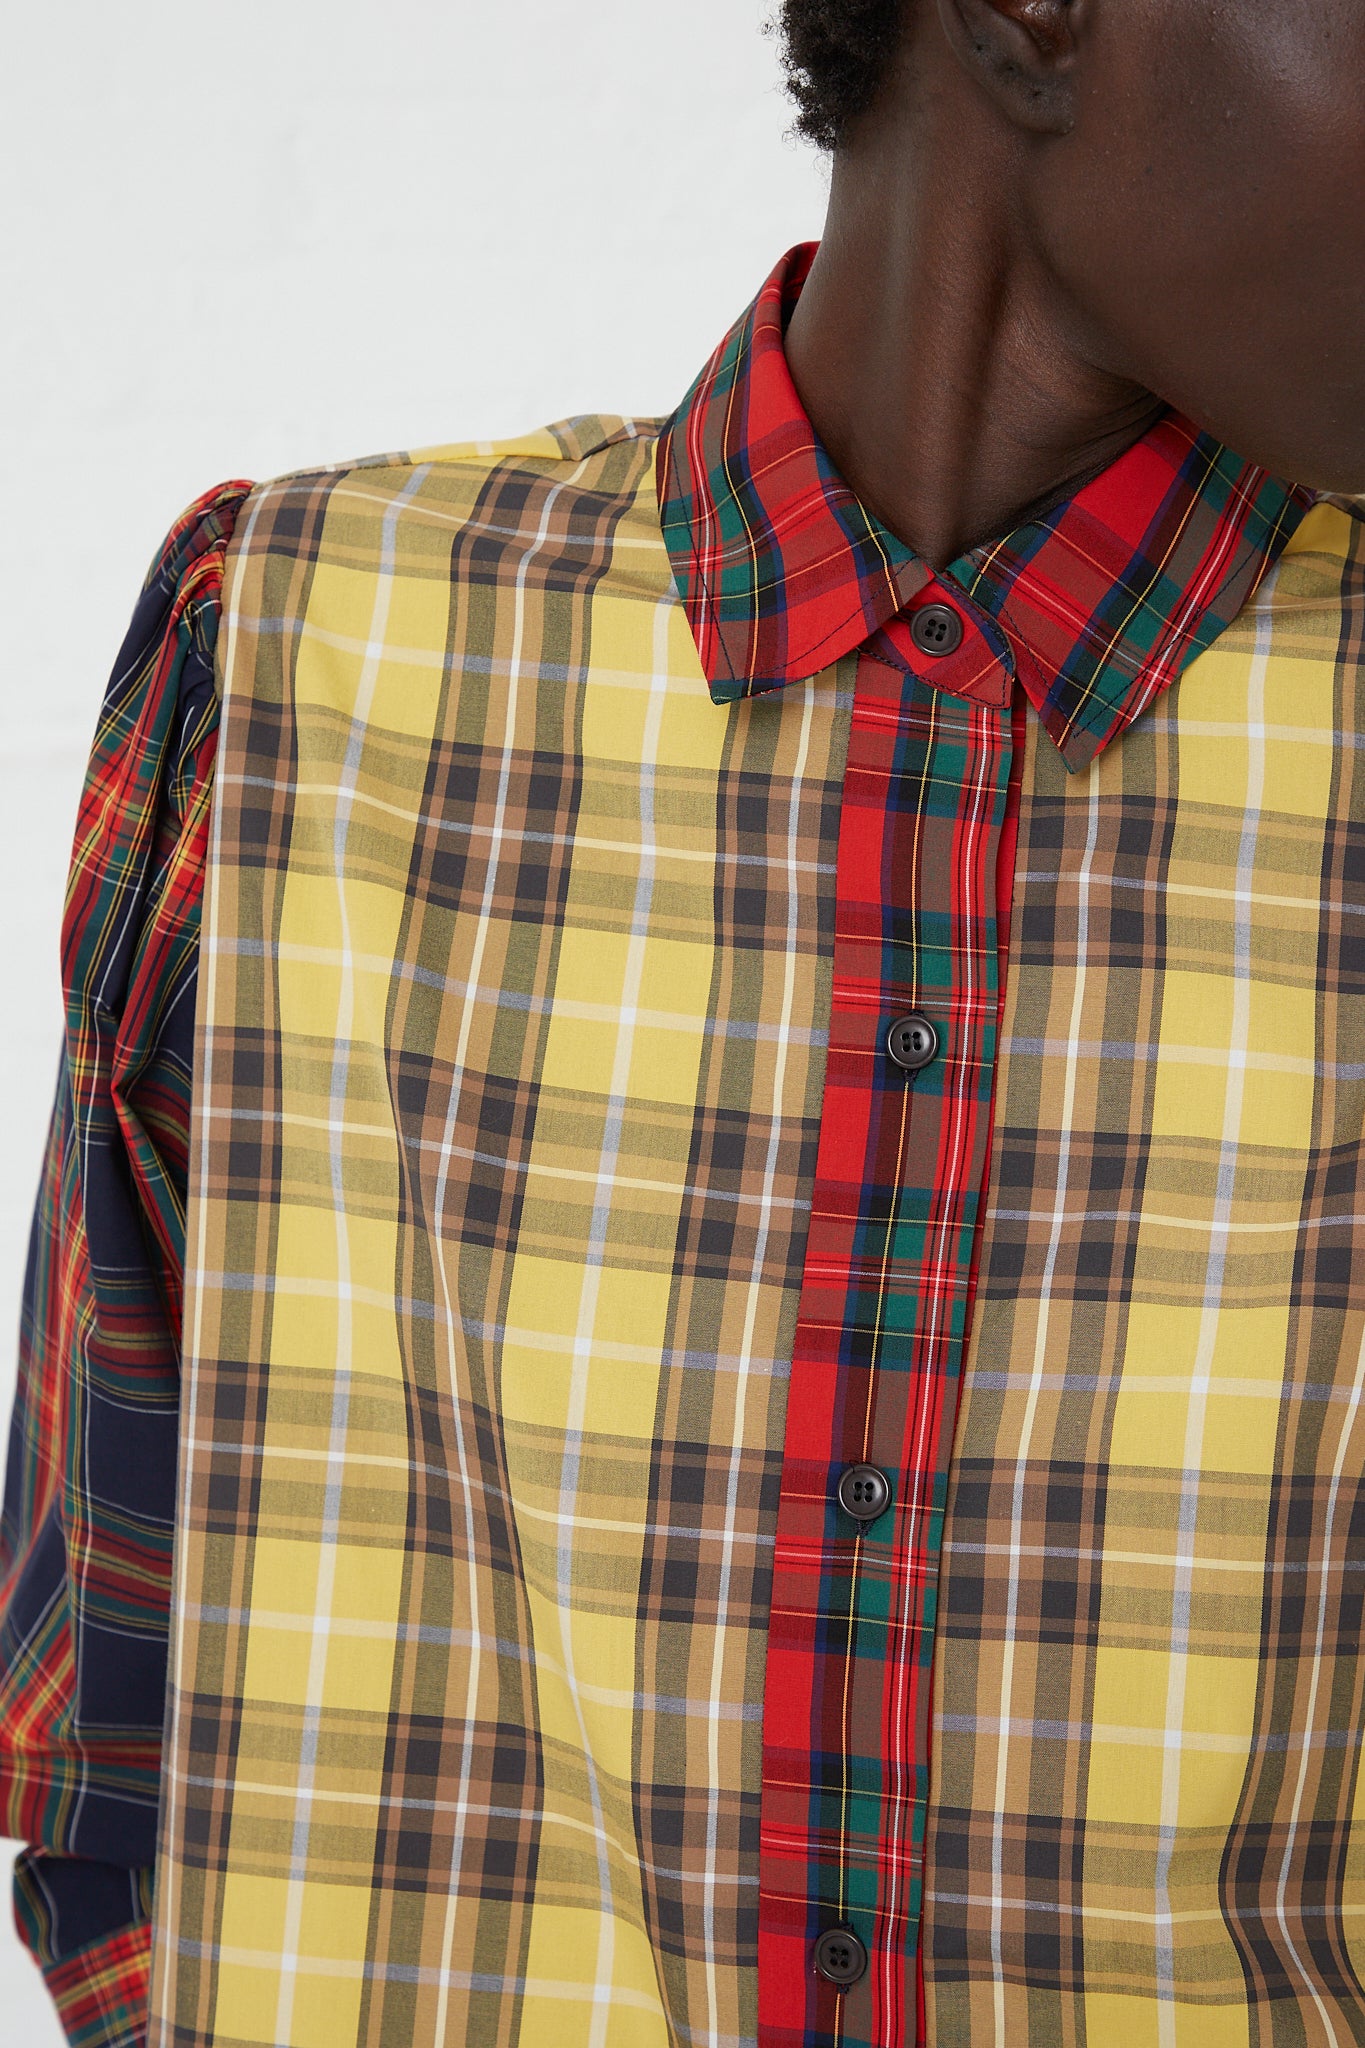 A woman wearing a long sleeve KasMaria Cotton Poplin Ruffle Shirt in Mix Plaid, made of patchwork Japanese cotton, featuring a ruffled hem, in yellow and red plaid.